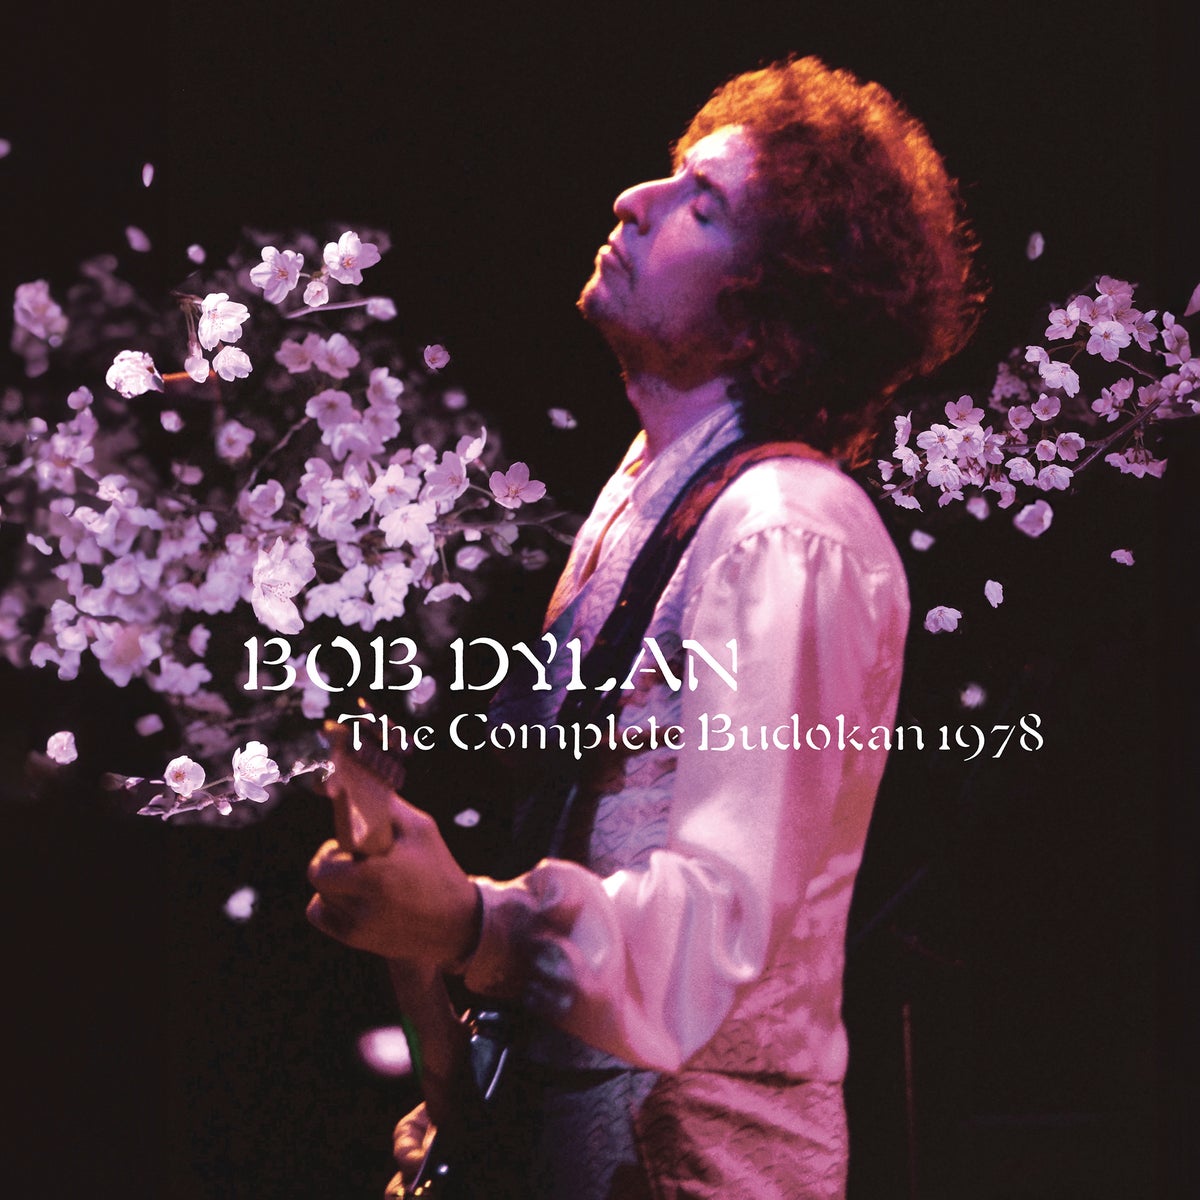 Music Review: Bob Dylan's 'The Complete Budokan 1978' box set is a welcomed release, flute and all